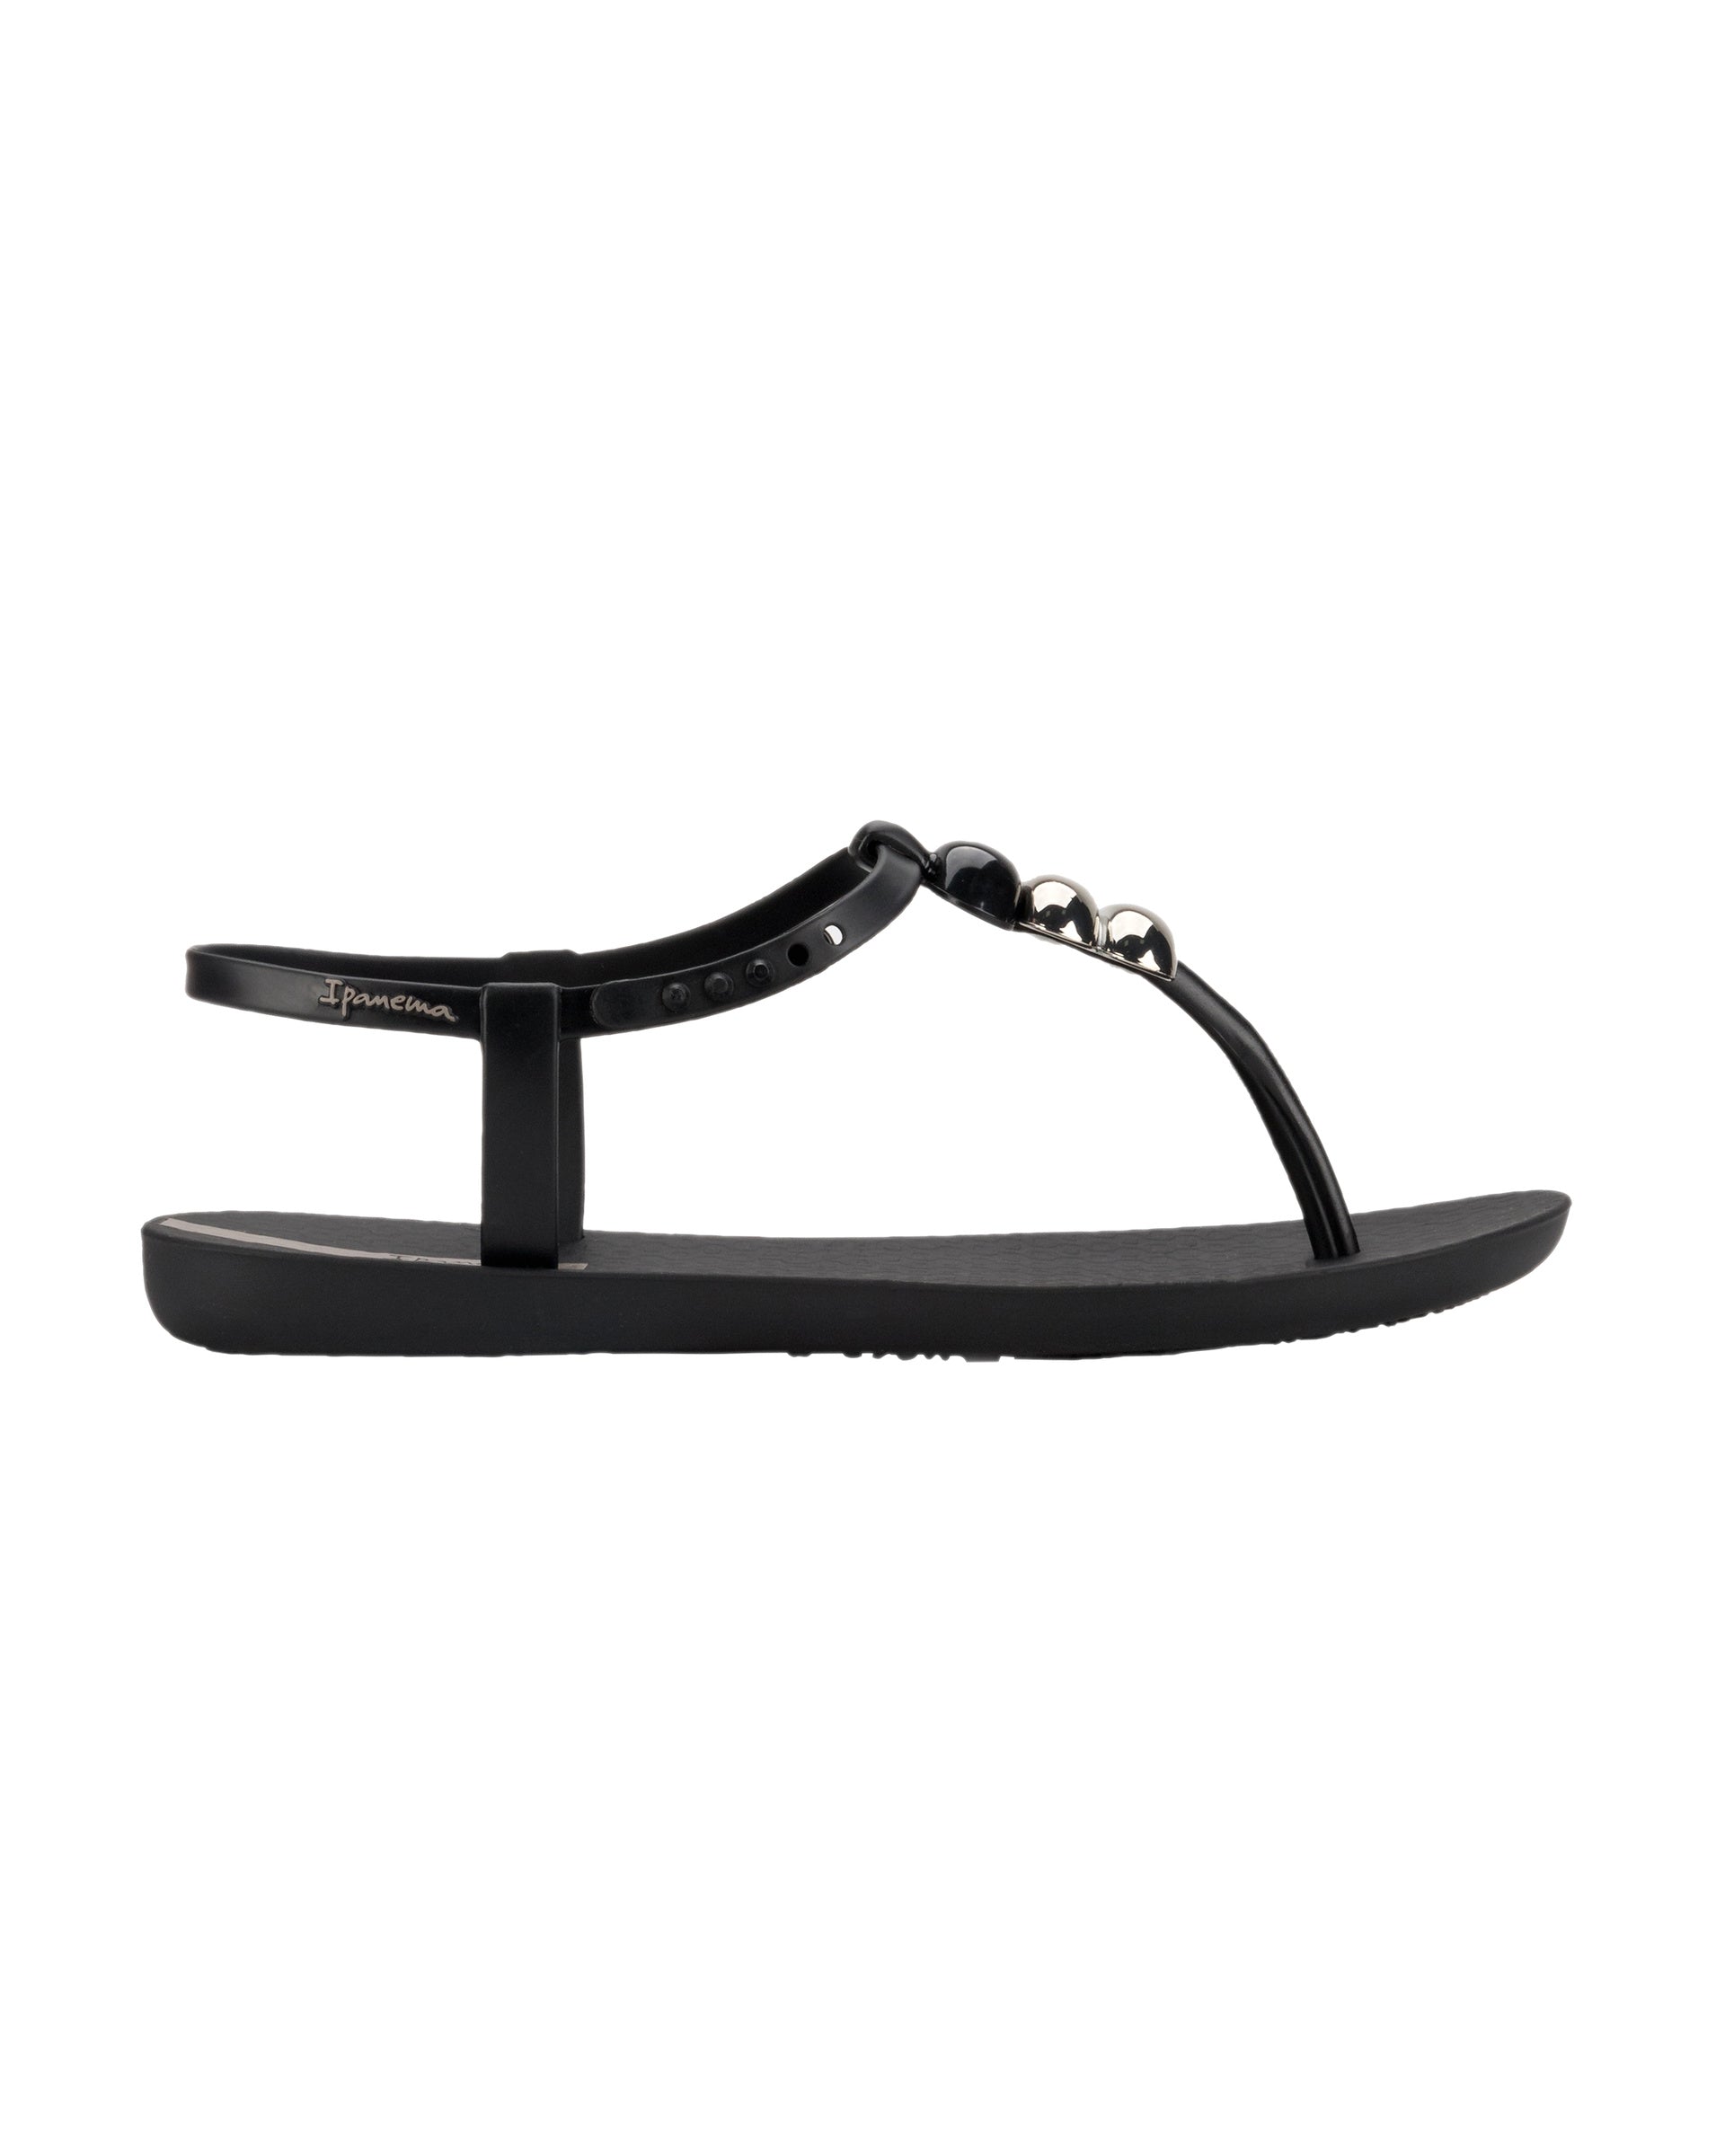 Outer side view of a black Ipanema Class women's sandal with 3 bubble baubles on the t-strap.